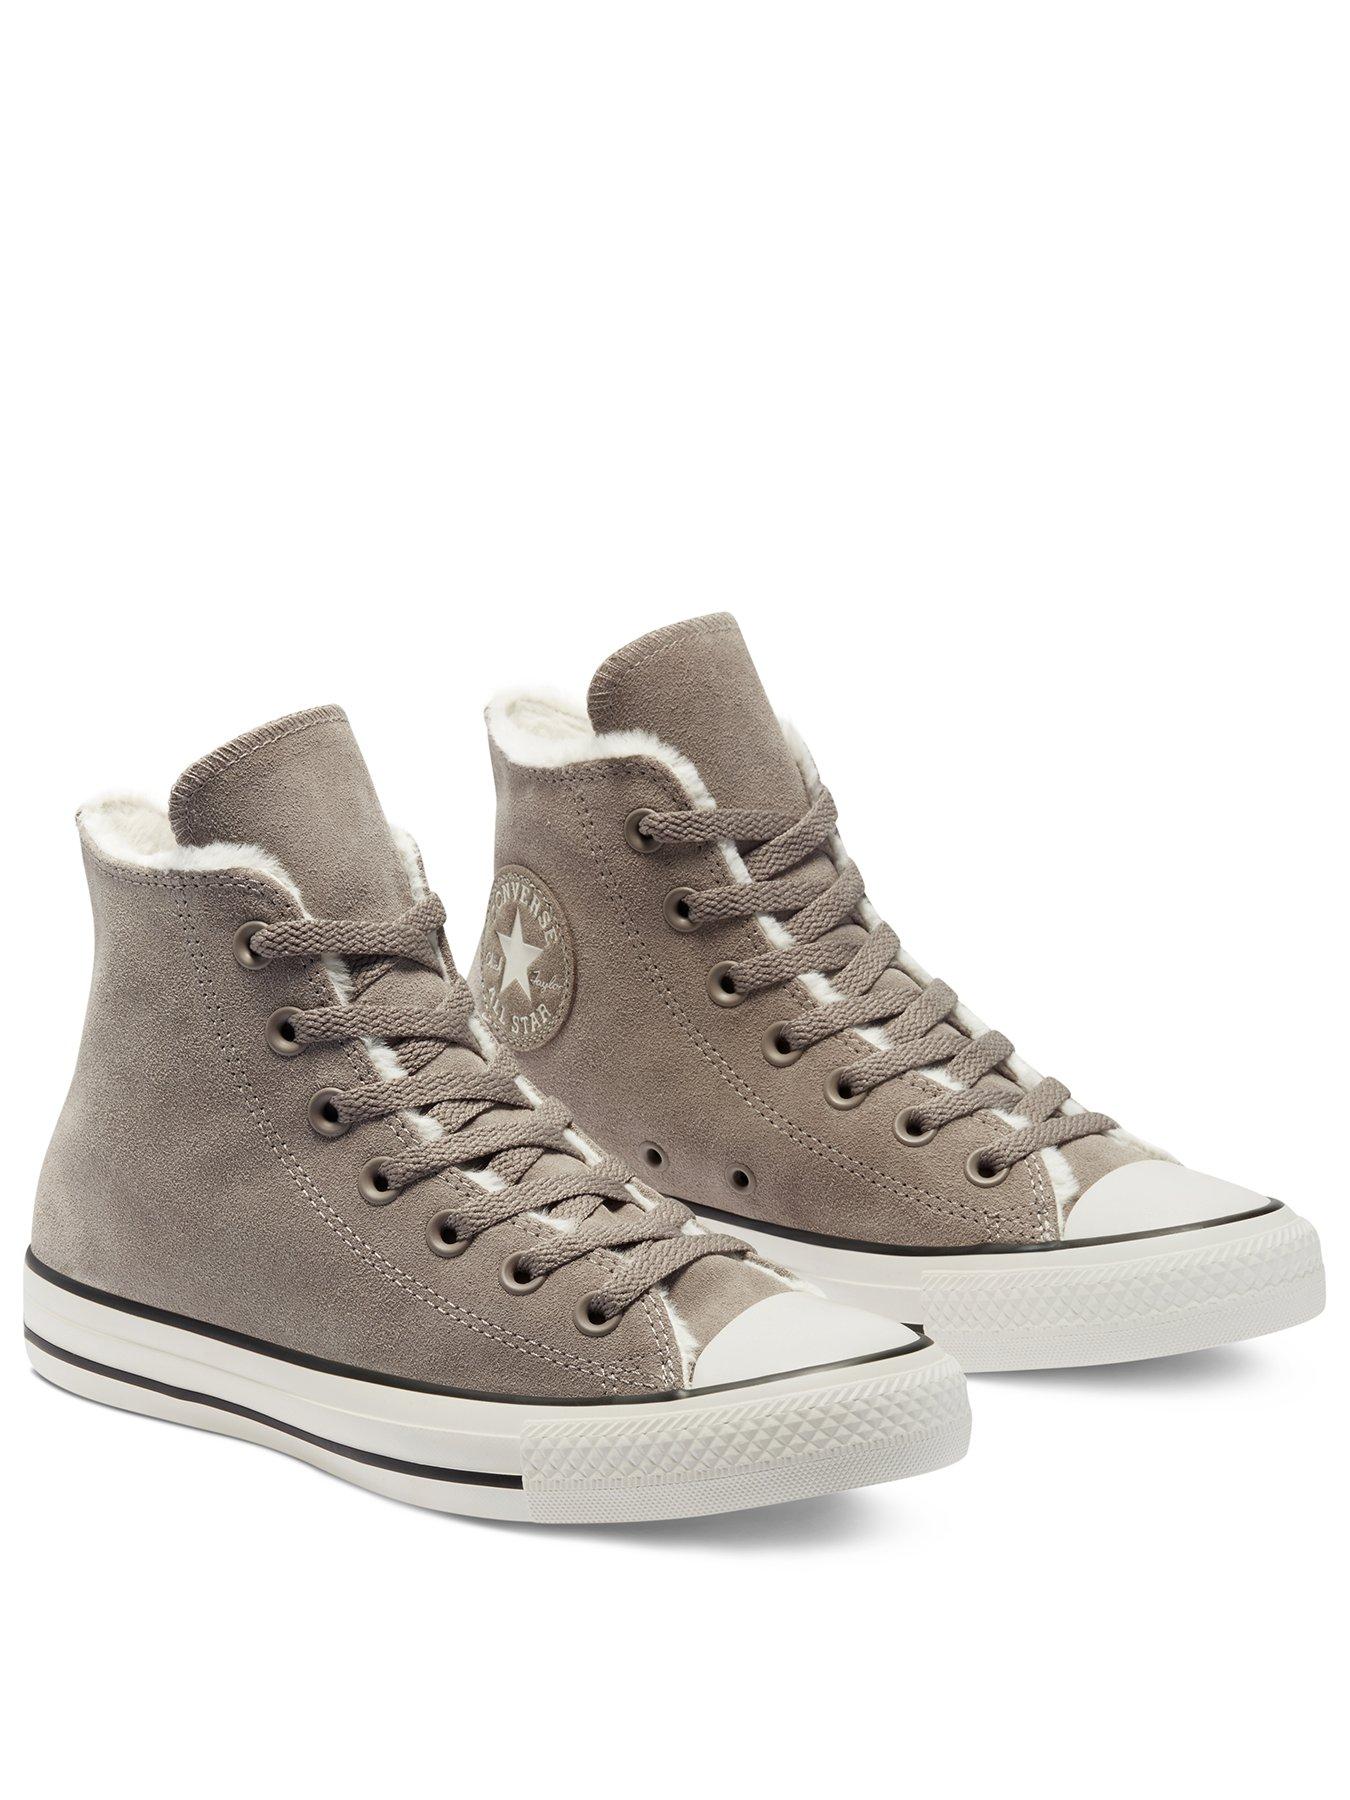 womens converse fur lined